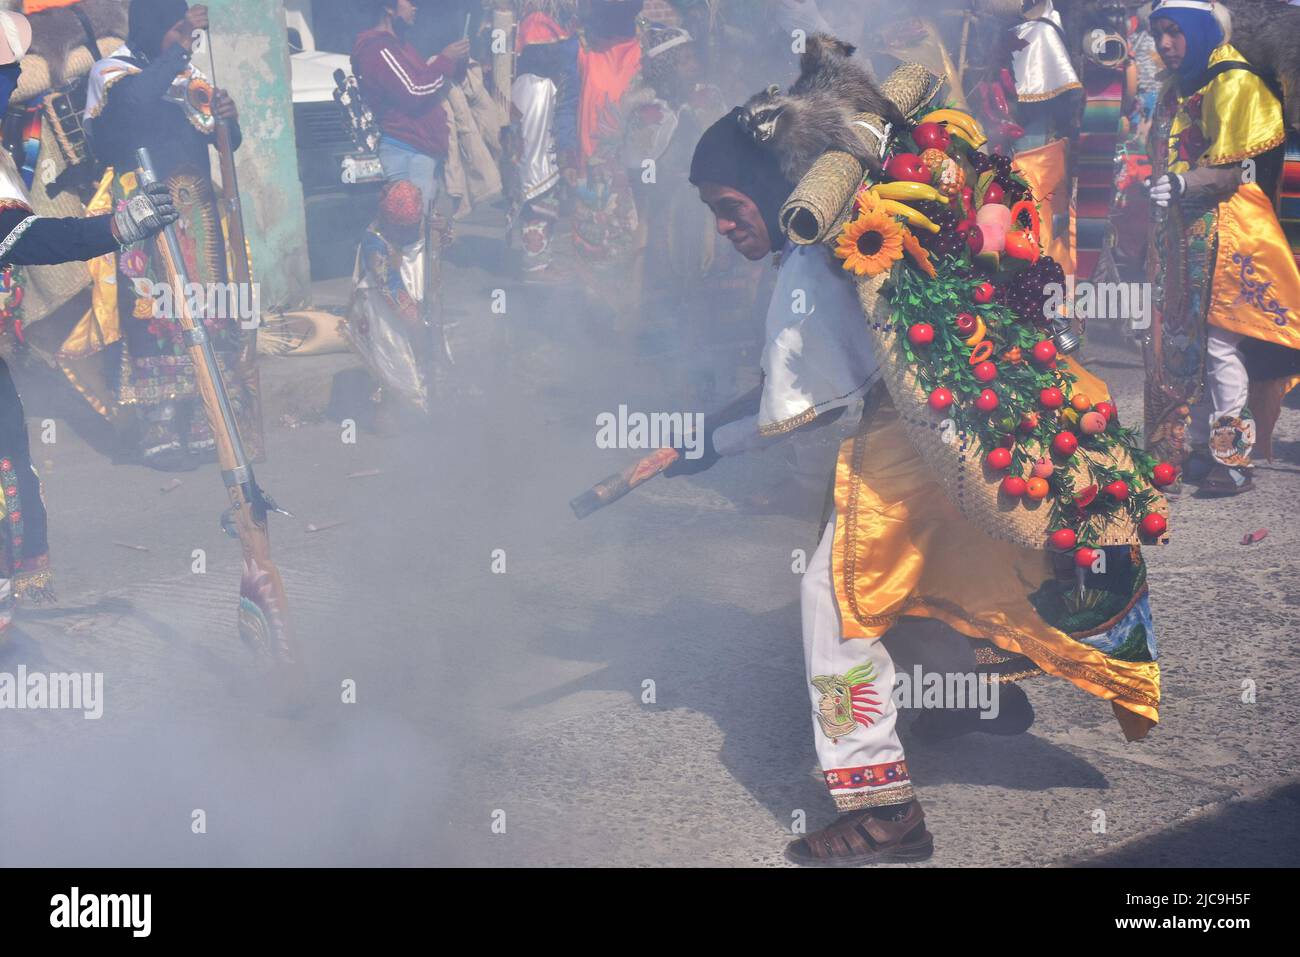 Guns being fired during Carnaval in Huejotzingo, Puebla Mexico Stock Photo